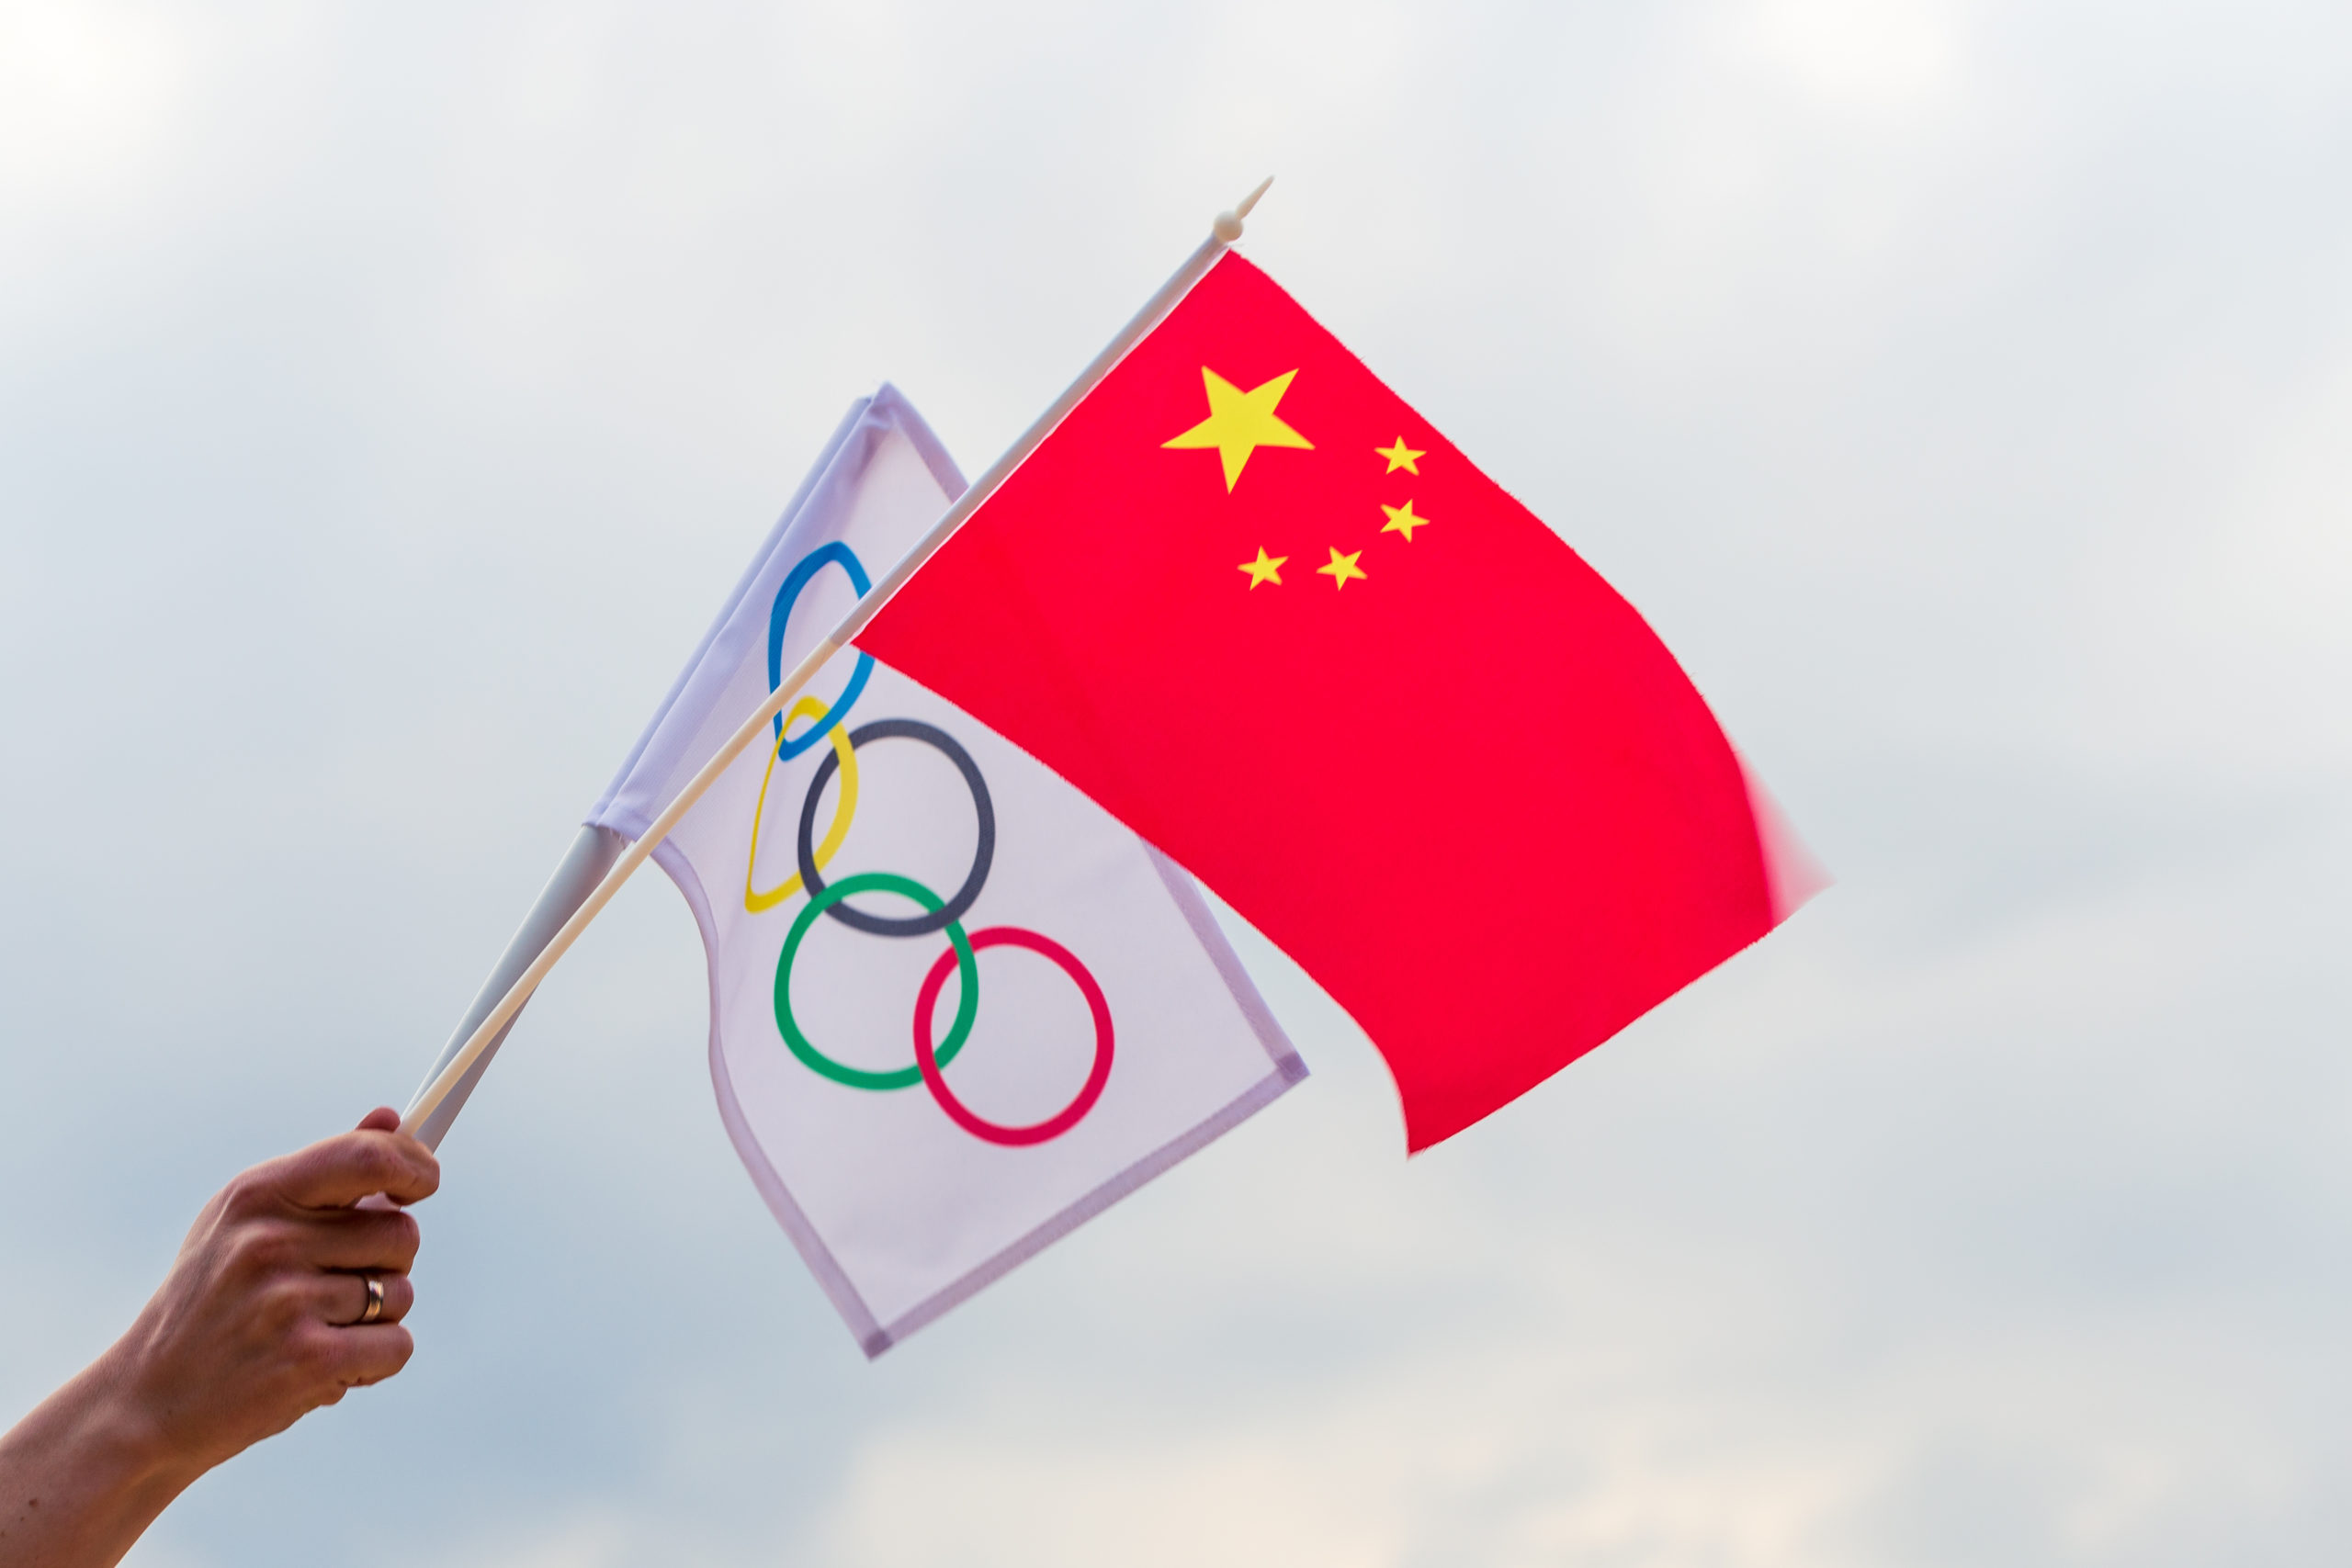 Nance in Christian Post: Women Should be Appalled China is Holding the Olympic Torch